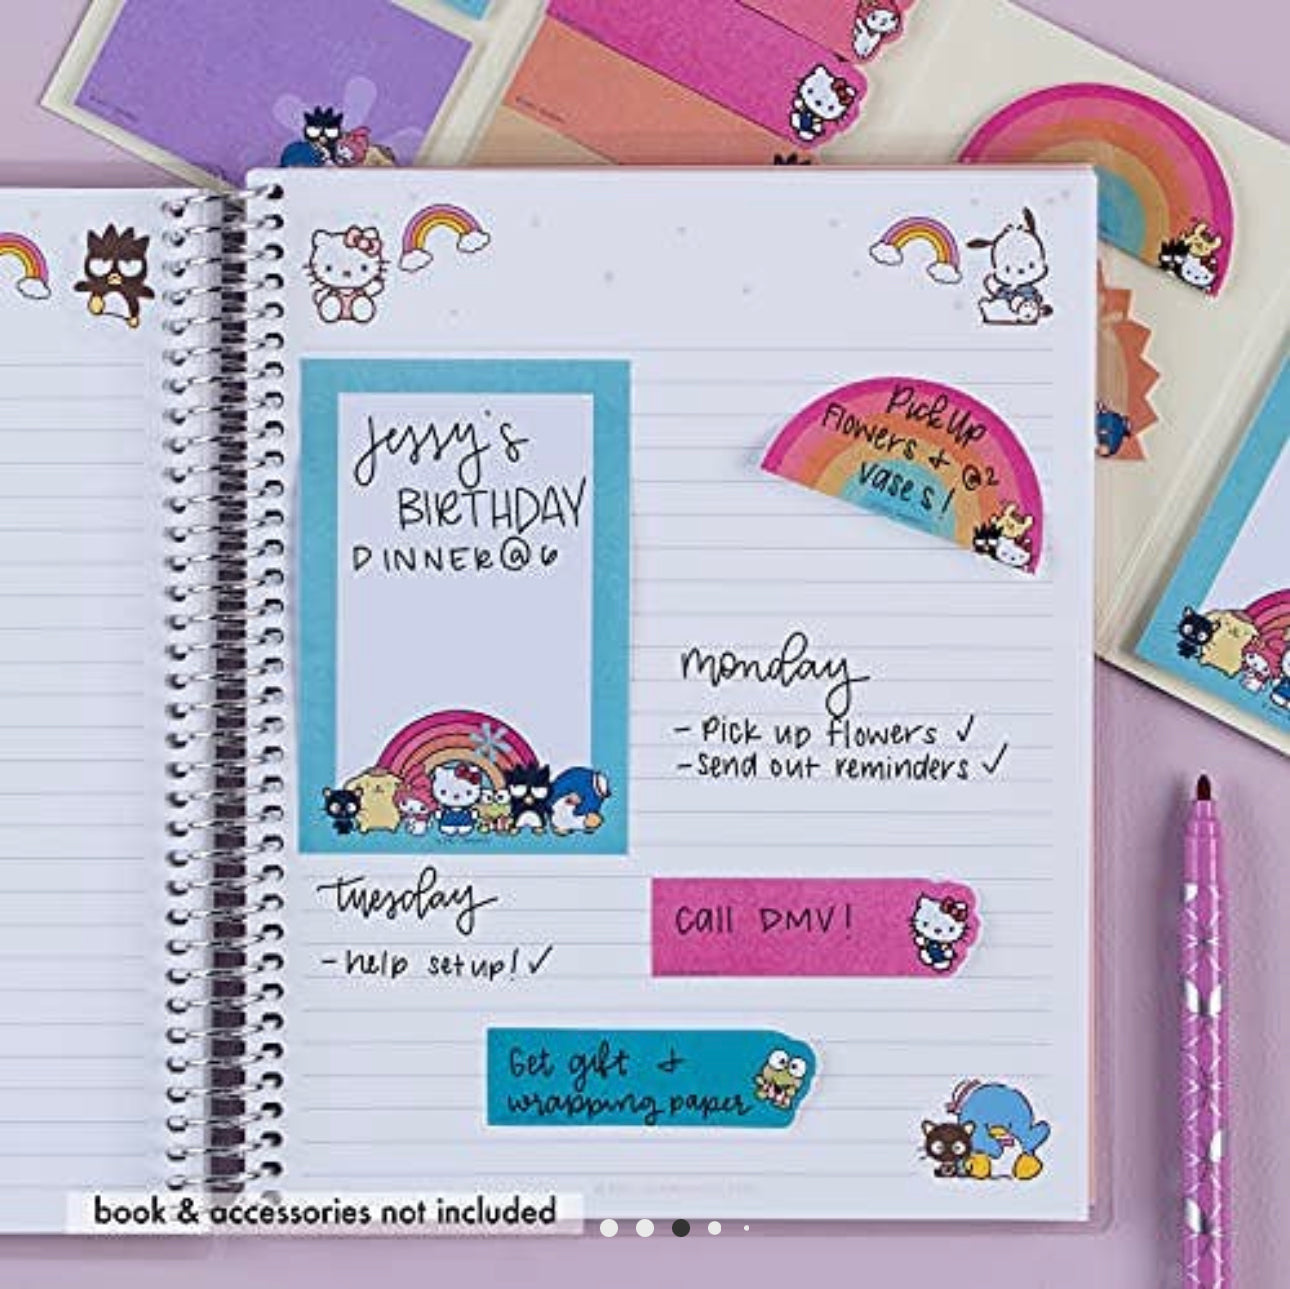 Hello Kitty and Friends x Erin Condren Sticky Notes